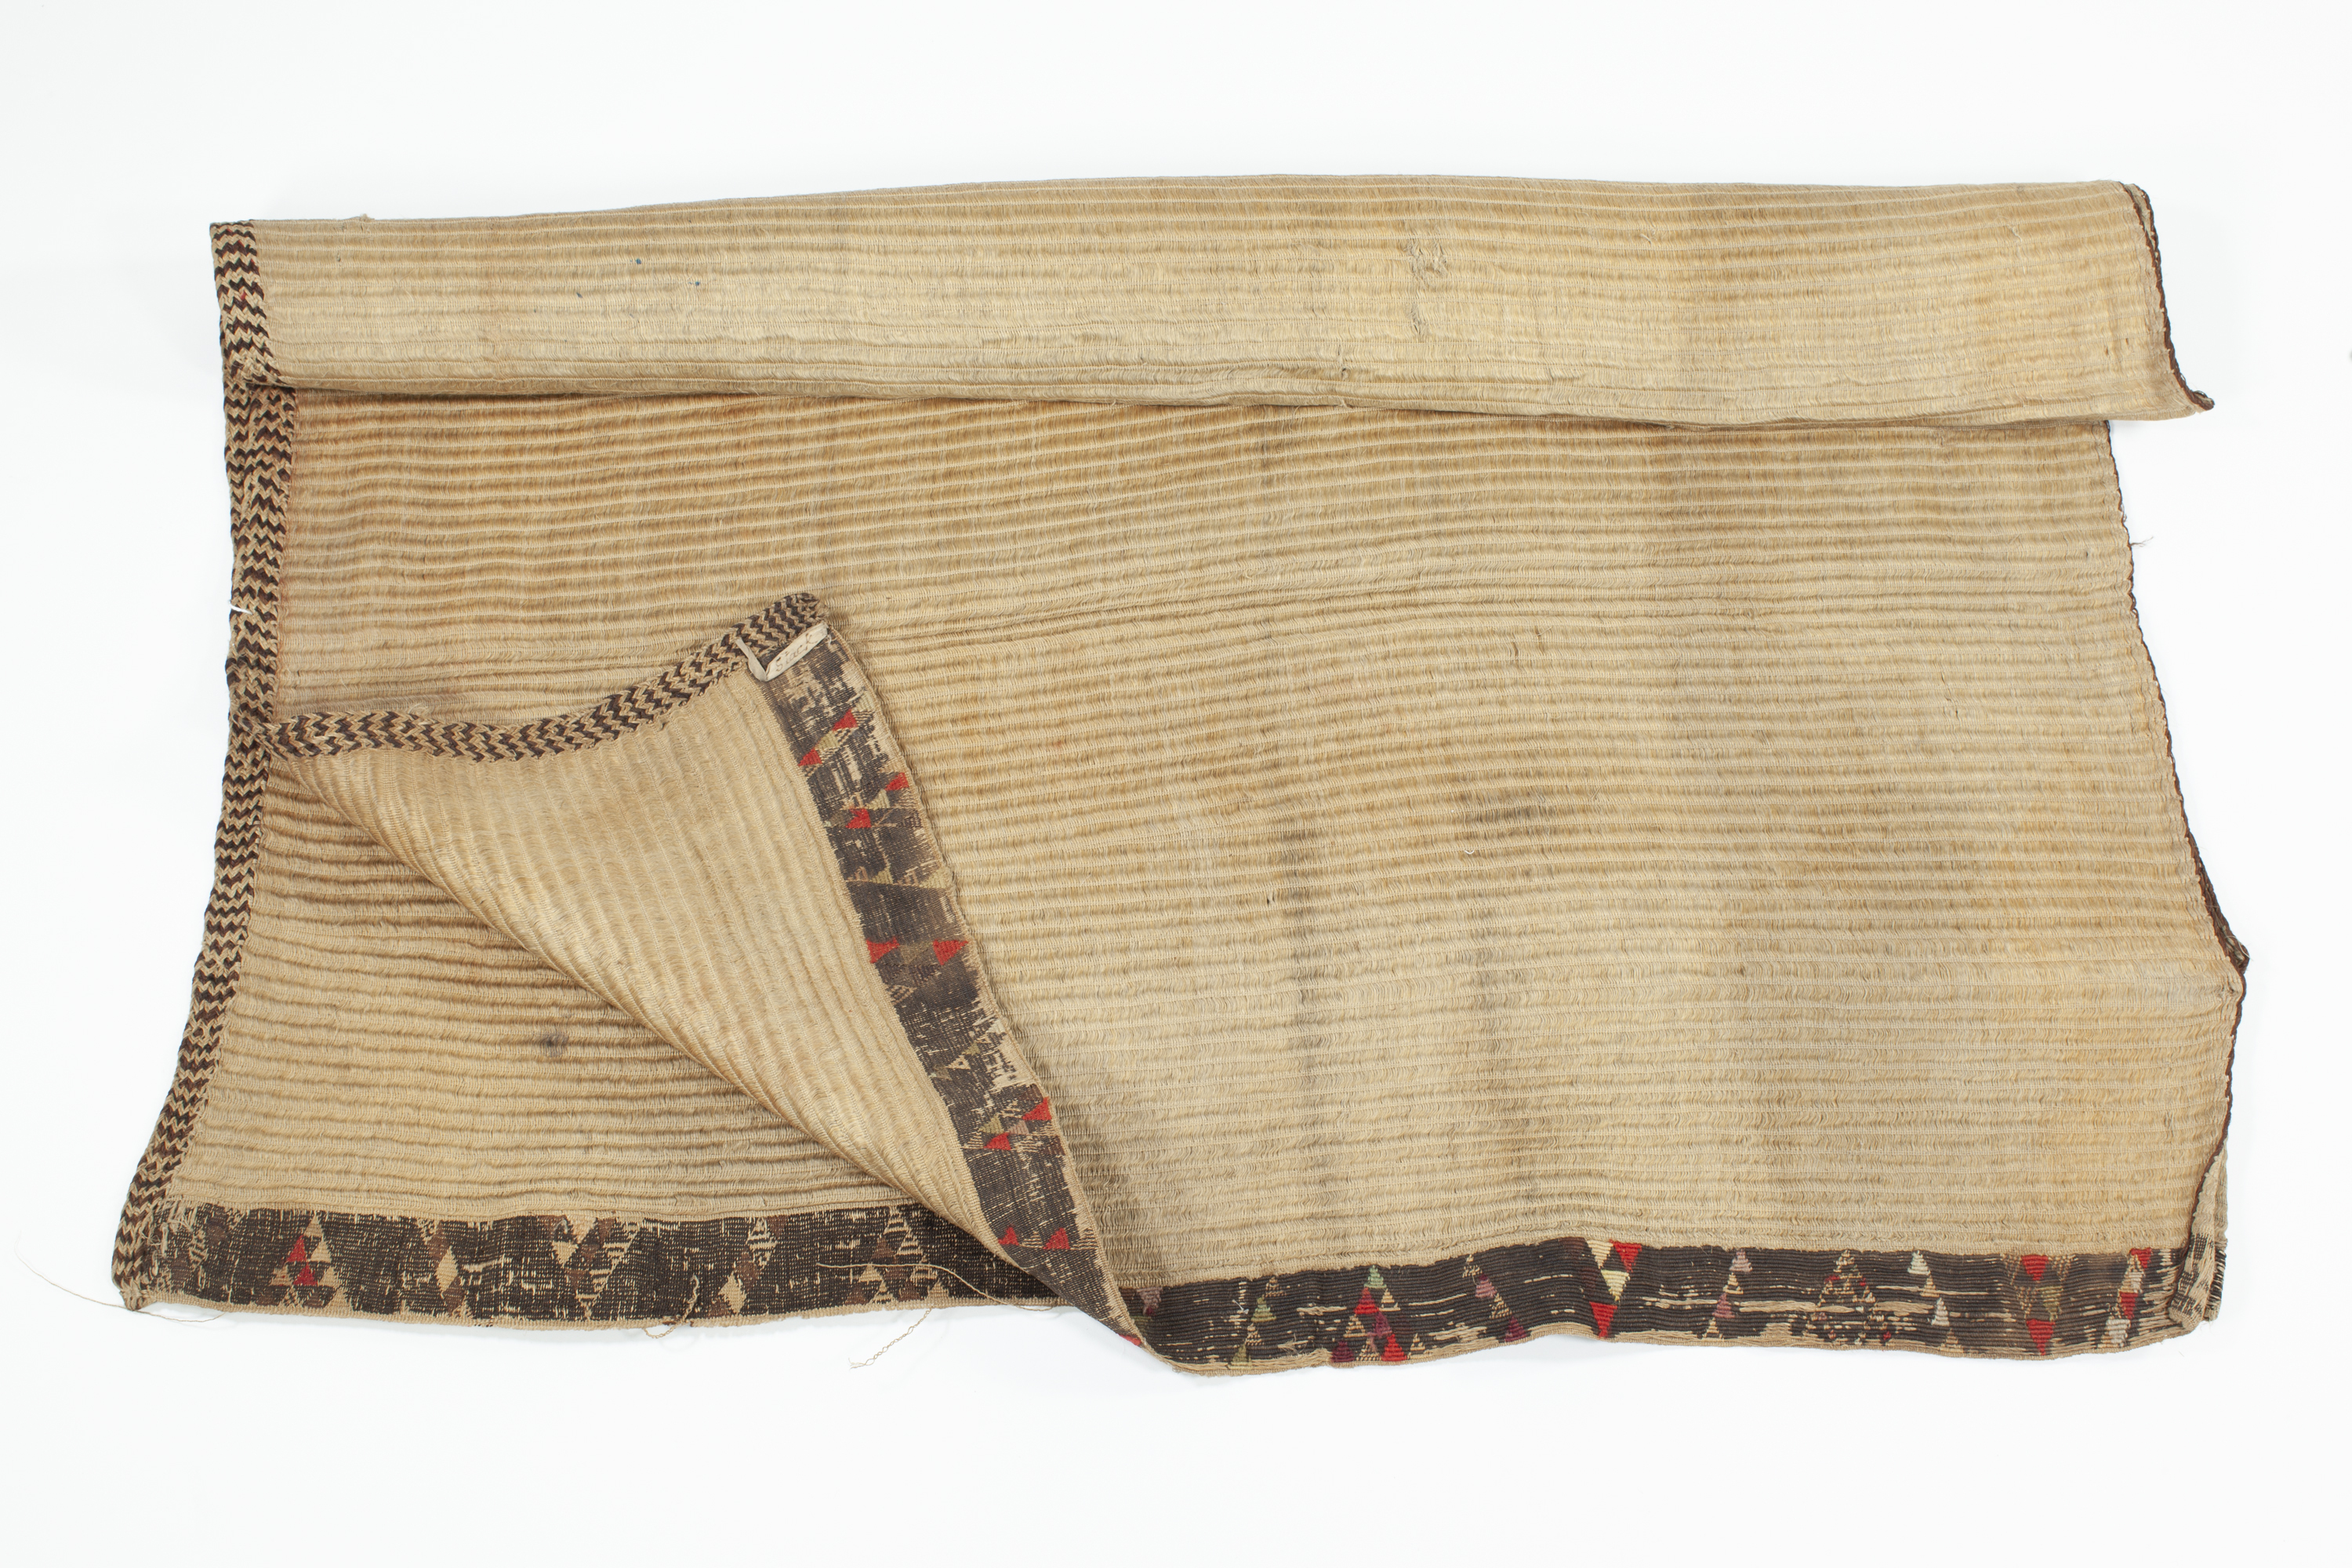 The kaitaka donated to Canterbury Museum by the Stacks in 1872. Canterbury Museum E140.33